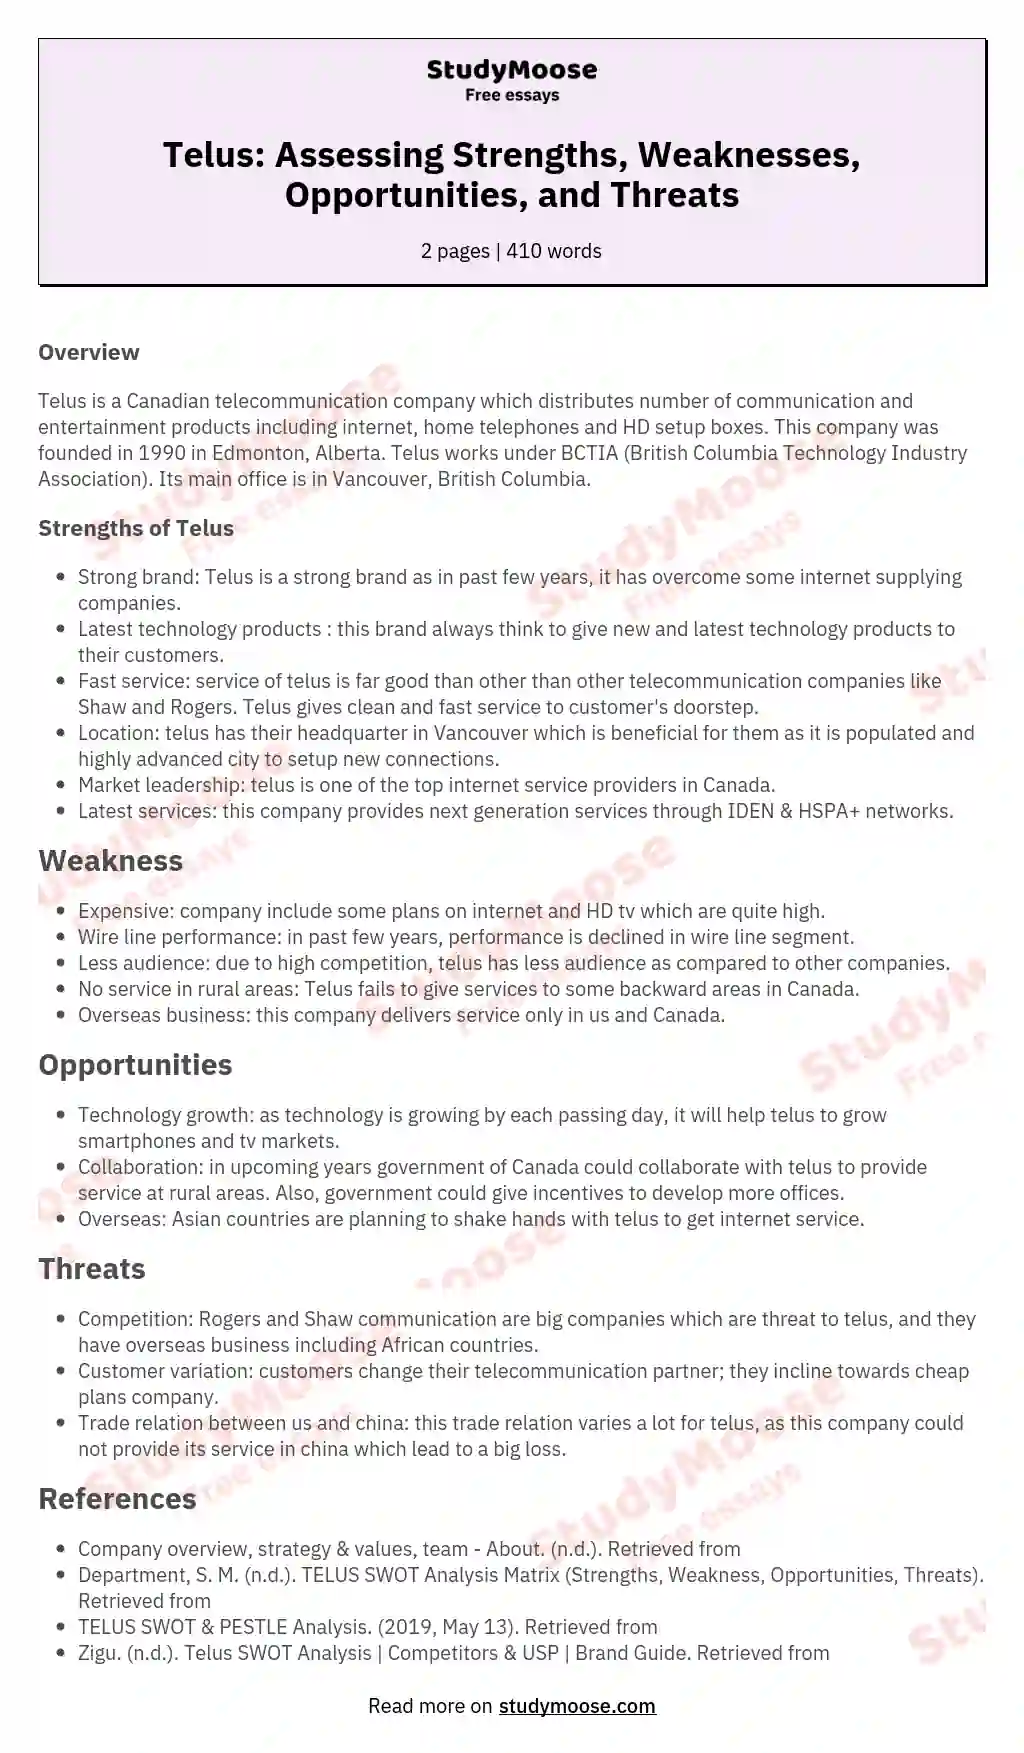 Telus: Assessing Strengths, Weaknesses, Opportunities, and Threats essay